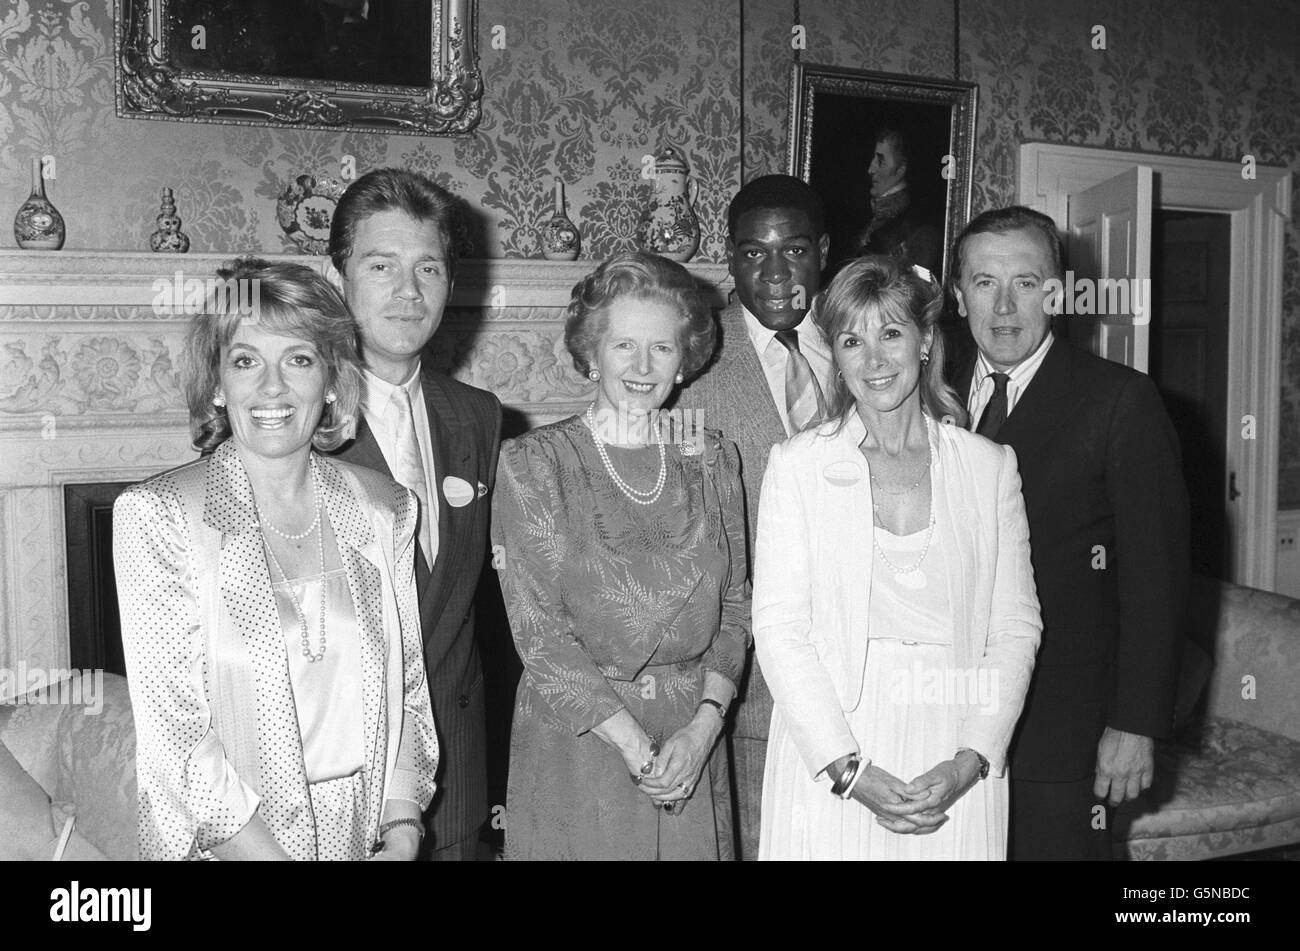 Prime Minister Margaret Thatcher, centre, at 10 Downing Street, London, with celebrities, from left, Esther Rantzen, Anthony Andrews, Frank Bruno, Susan Hampshire and David Frost. The PM hosted a reception for Childline to thank the charity's supporters. Esther Rantzen is the chairwoman of the national helpline for children in trouble or danger. Stock Photo